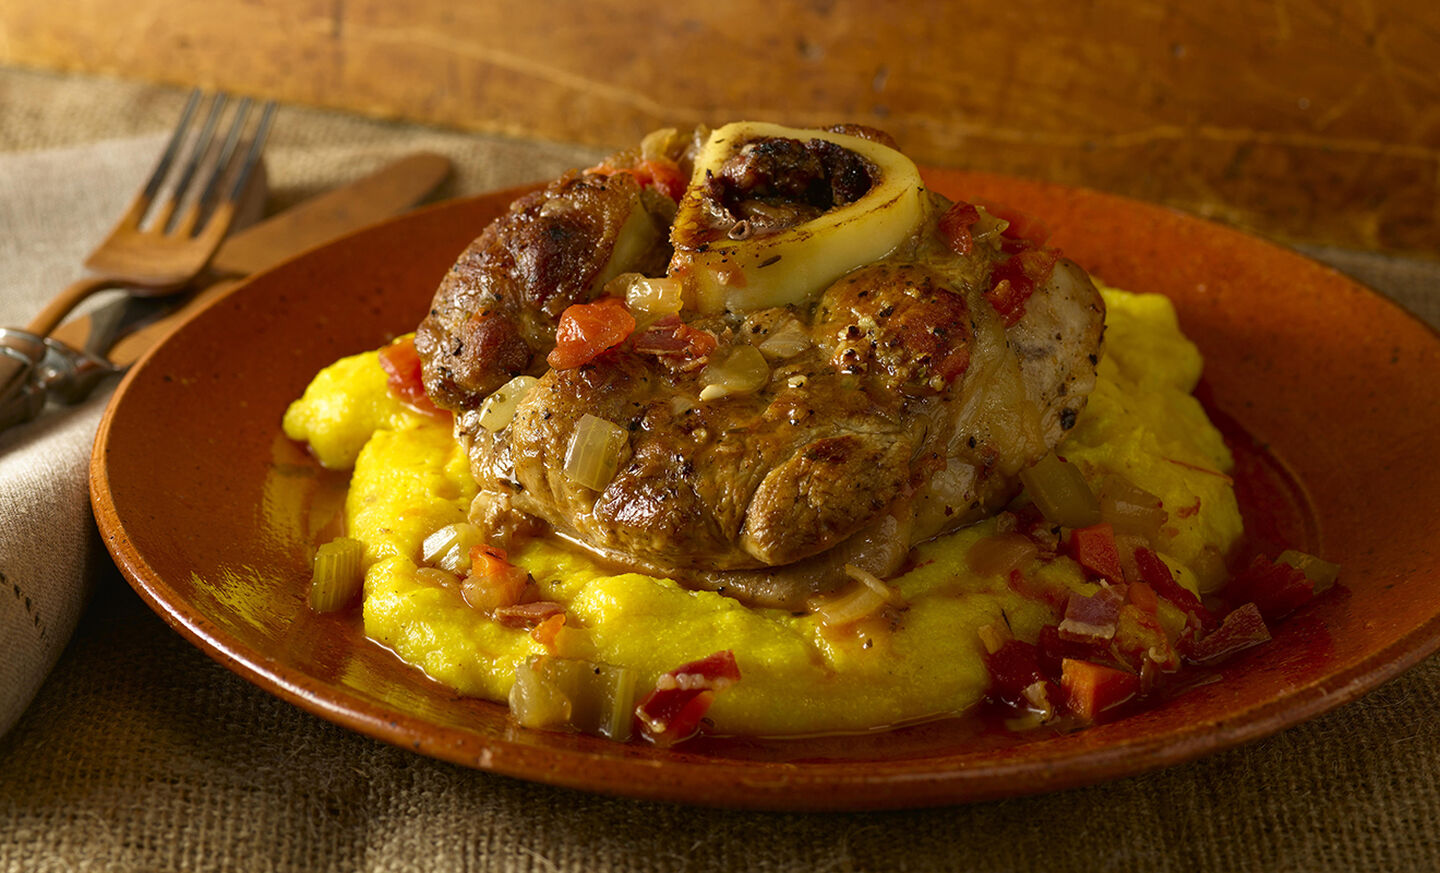 Pam Anderson's Veal Osso Buco with Dirty Polenta Recipe | D'Artagnan